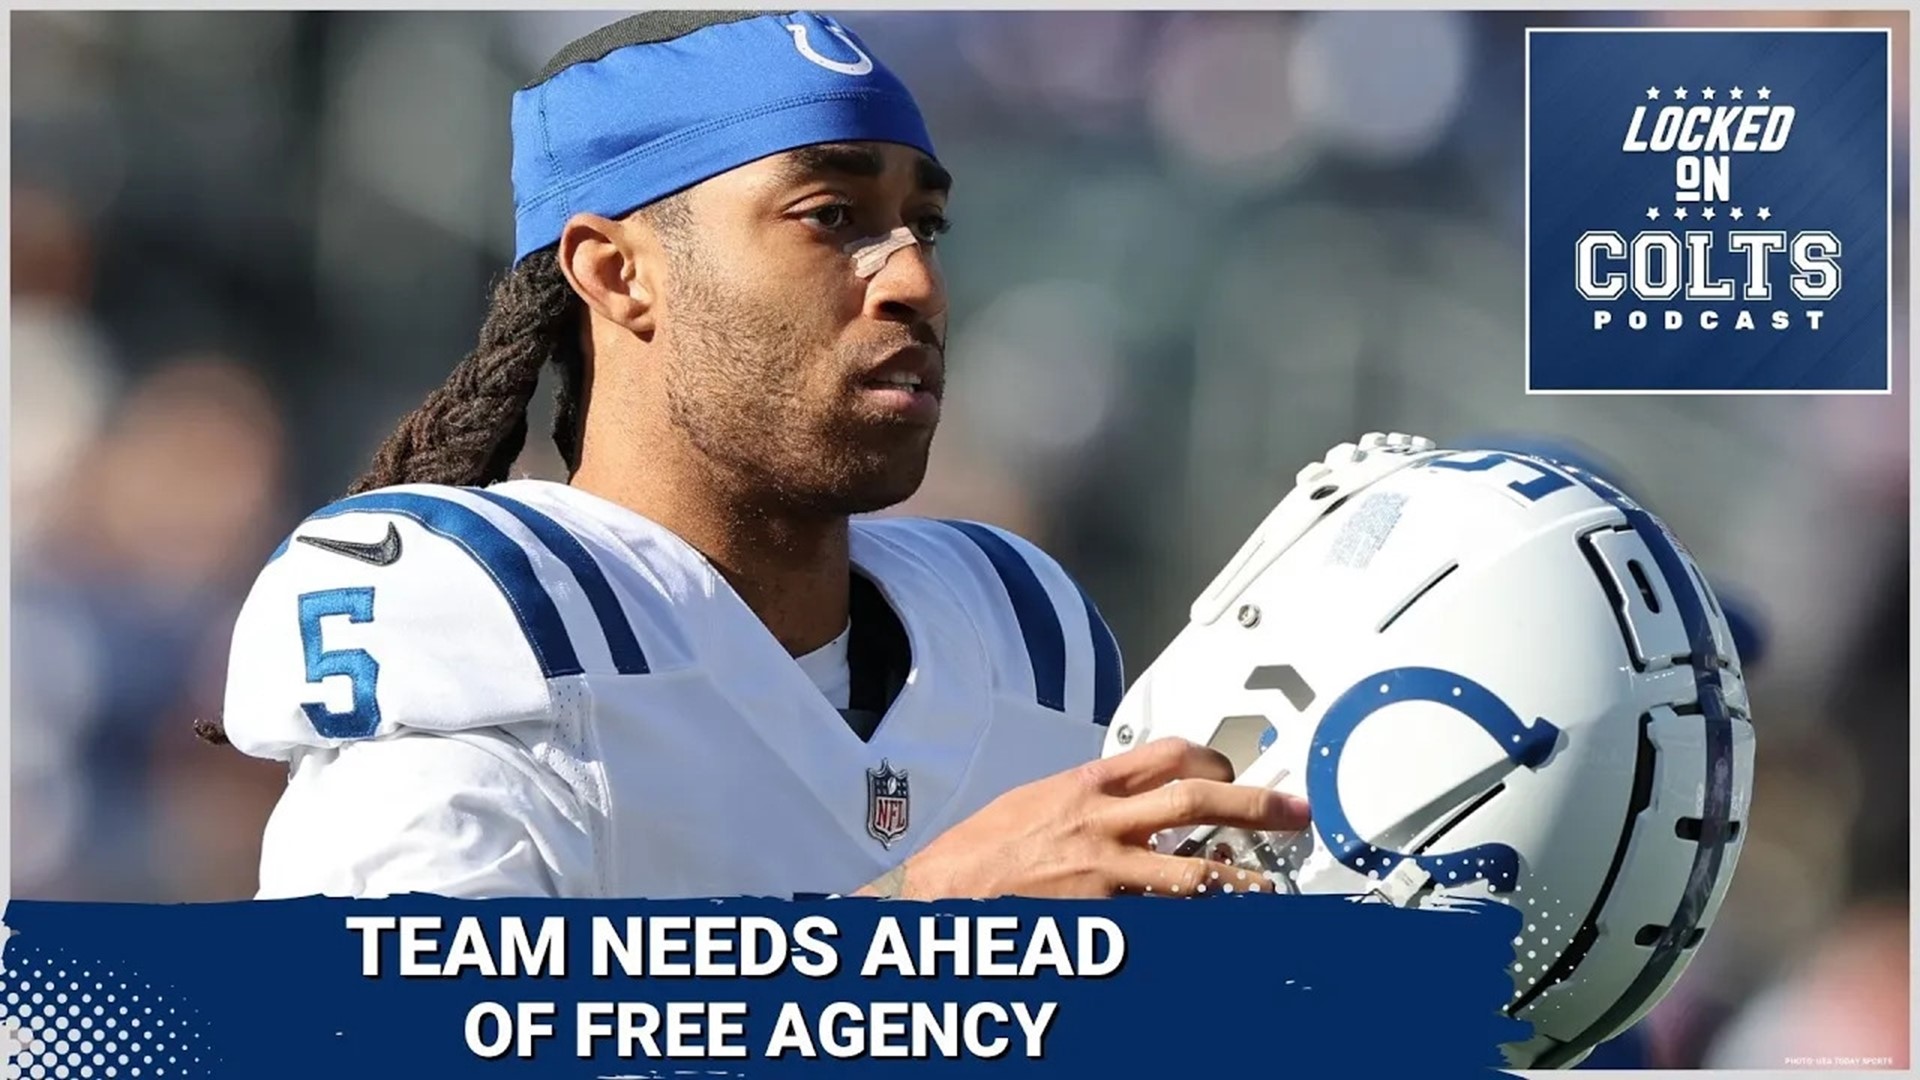 NFL free agency begins next week, and the Indianapolis Colts have three big needs. Of course, quarterback, but also cornerback and offensive line depth are needed.